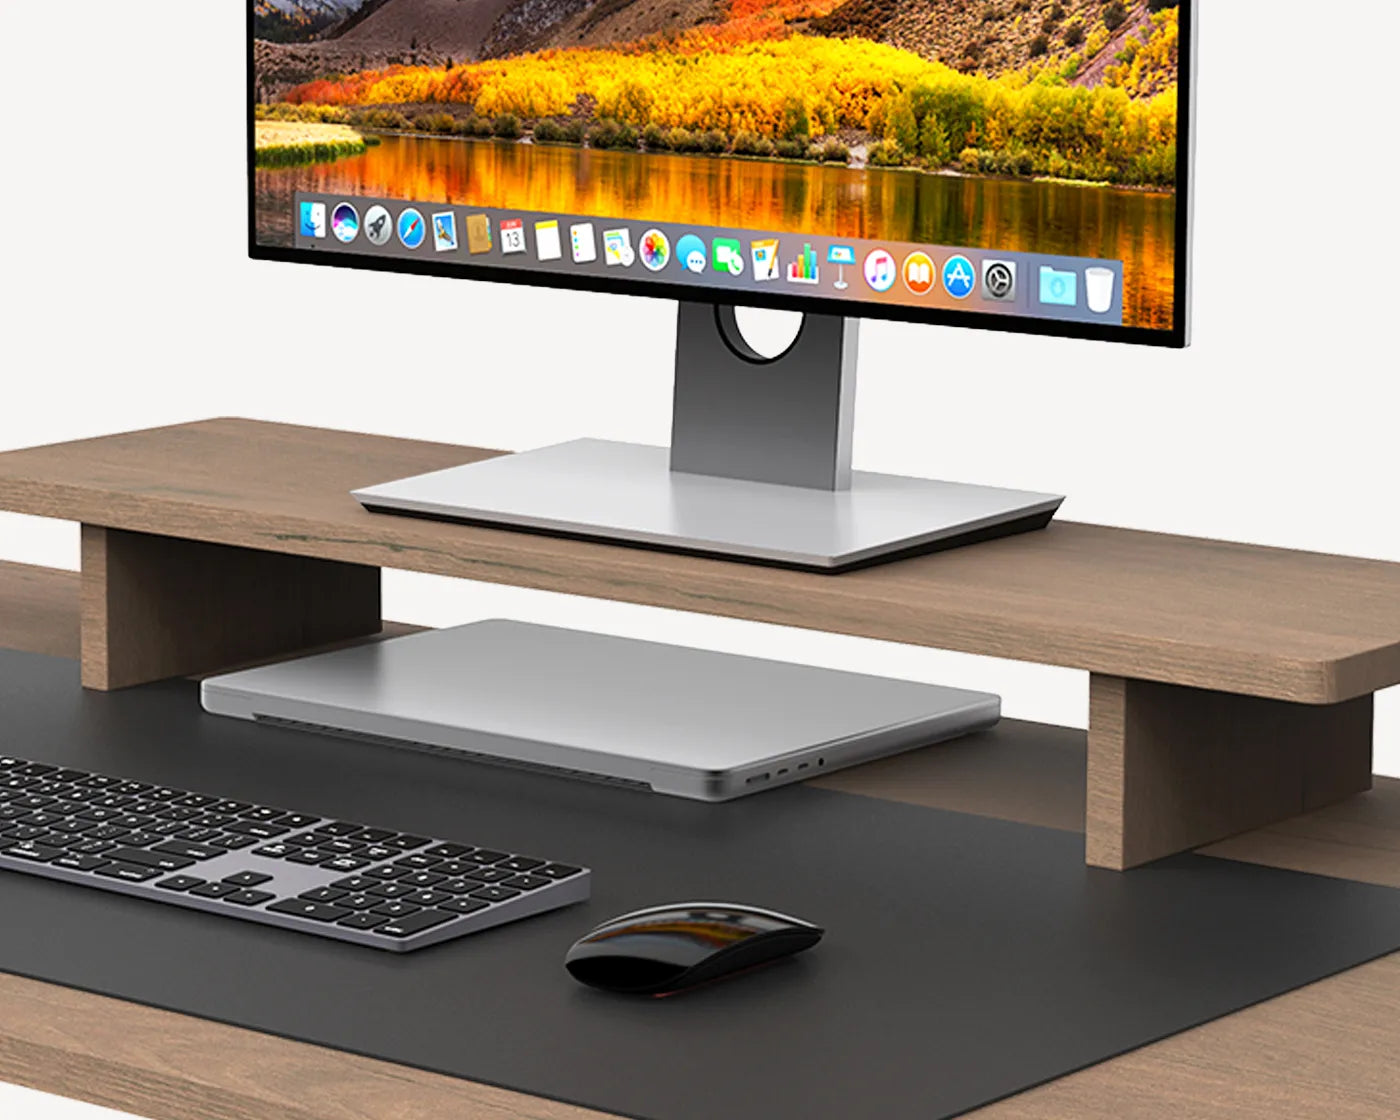 An ergonomic wooden monitor riser on a desk, lifting a screen to eye level for improved posture and reduced strain